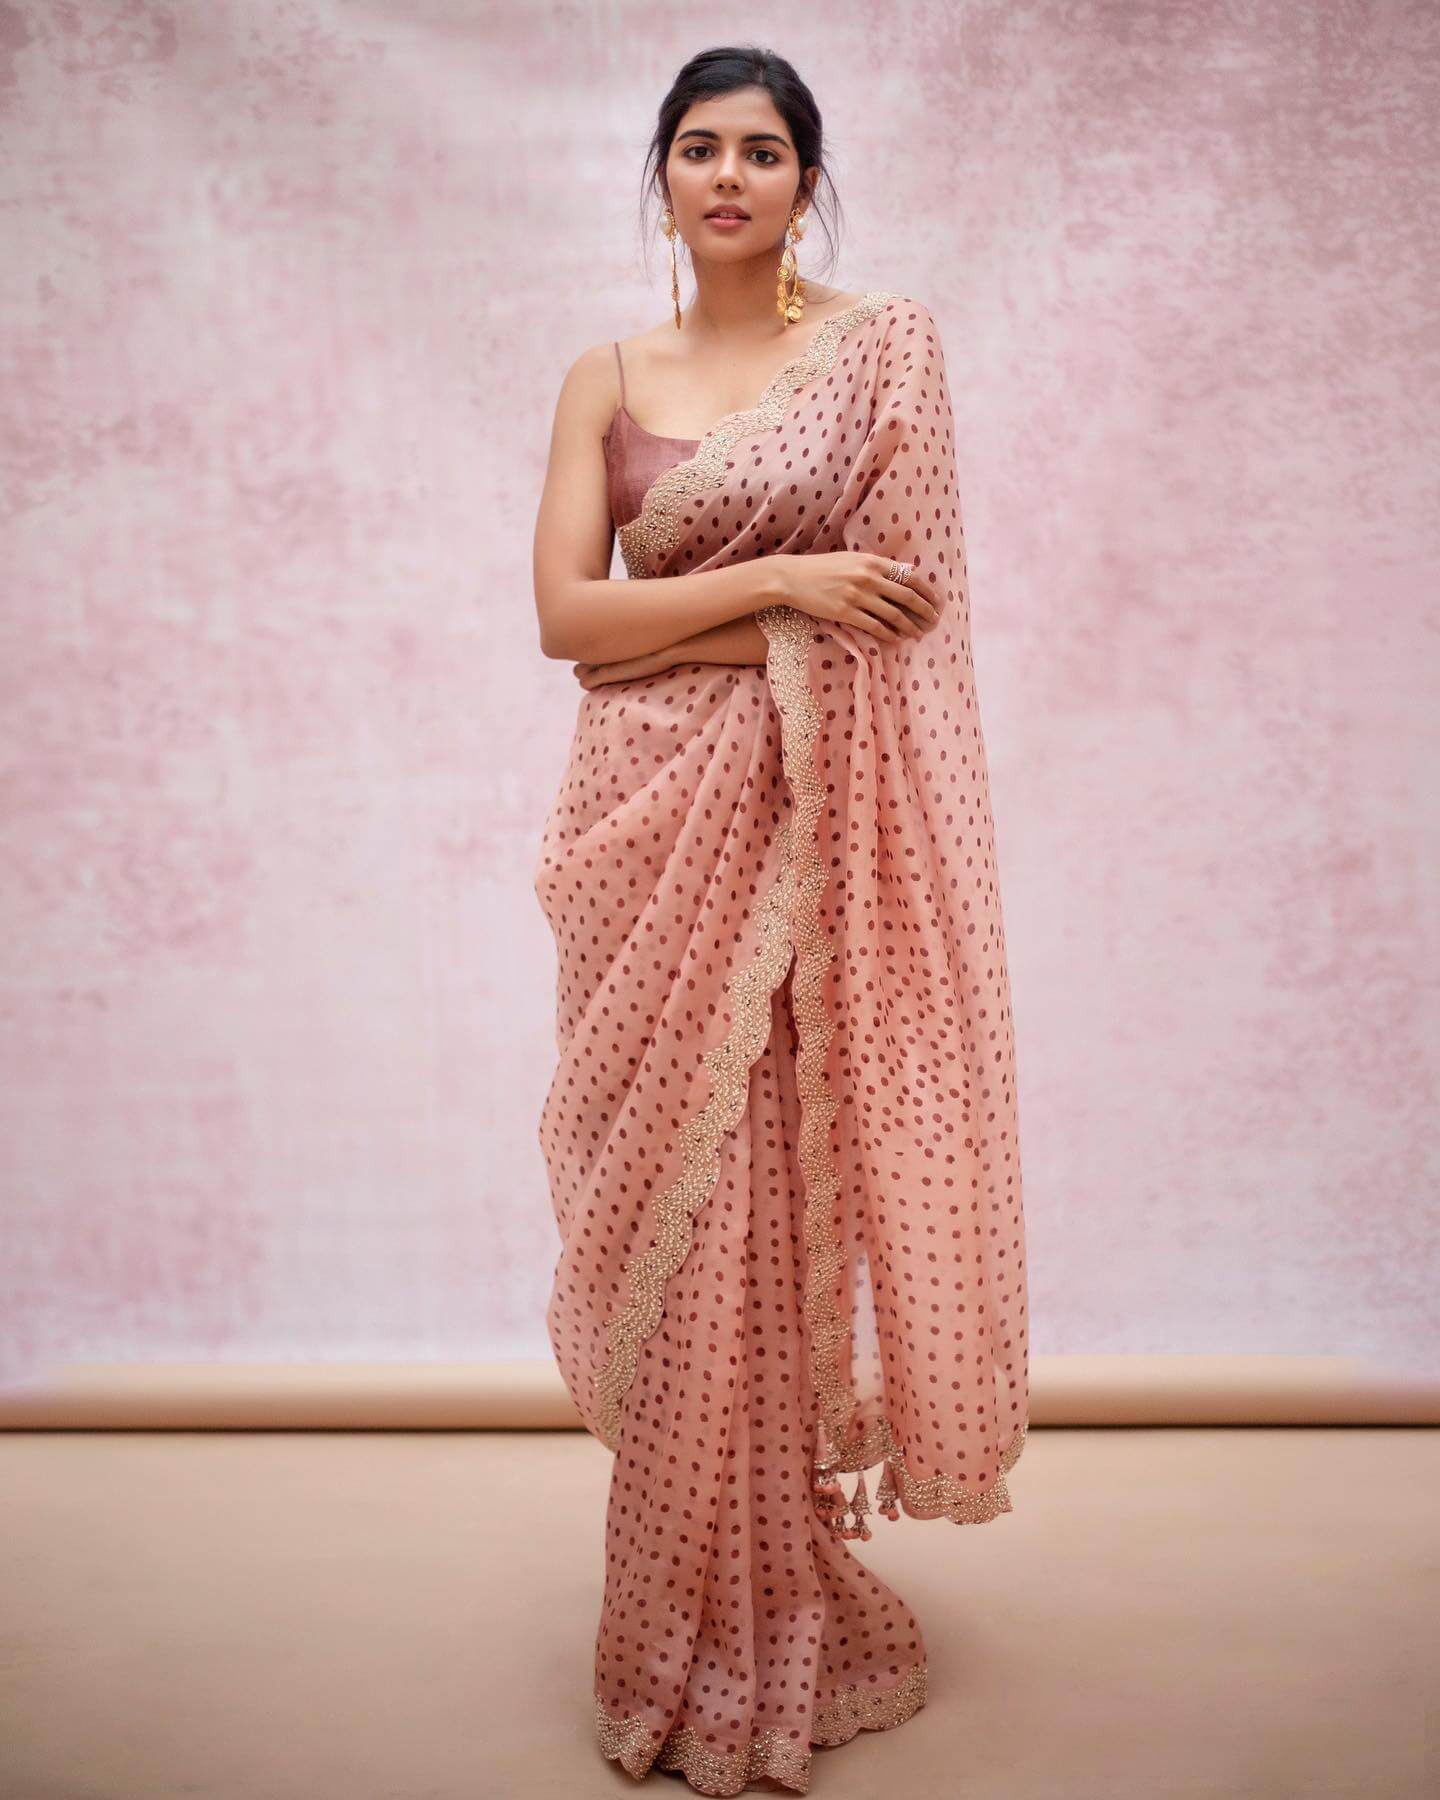 Kalyani Priyadarshan Chic Outfits Looks In Beige Polka Dot Saree Paired With Noddle Strip Blouse